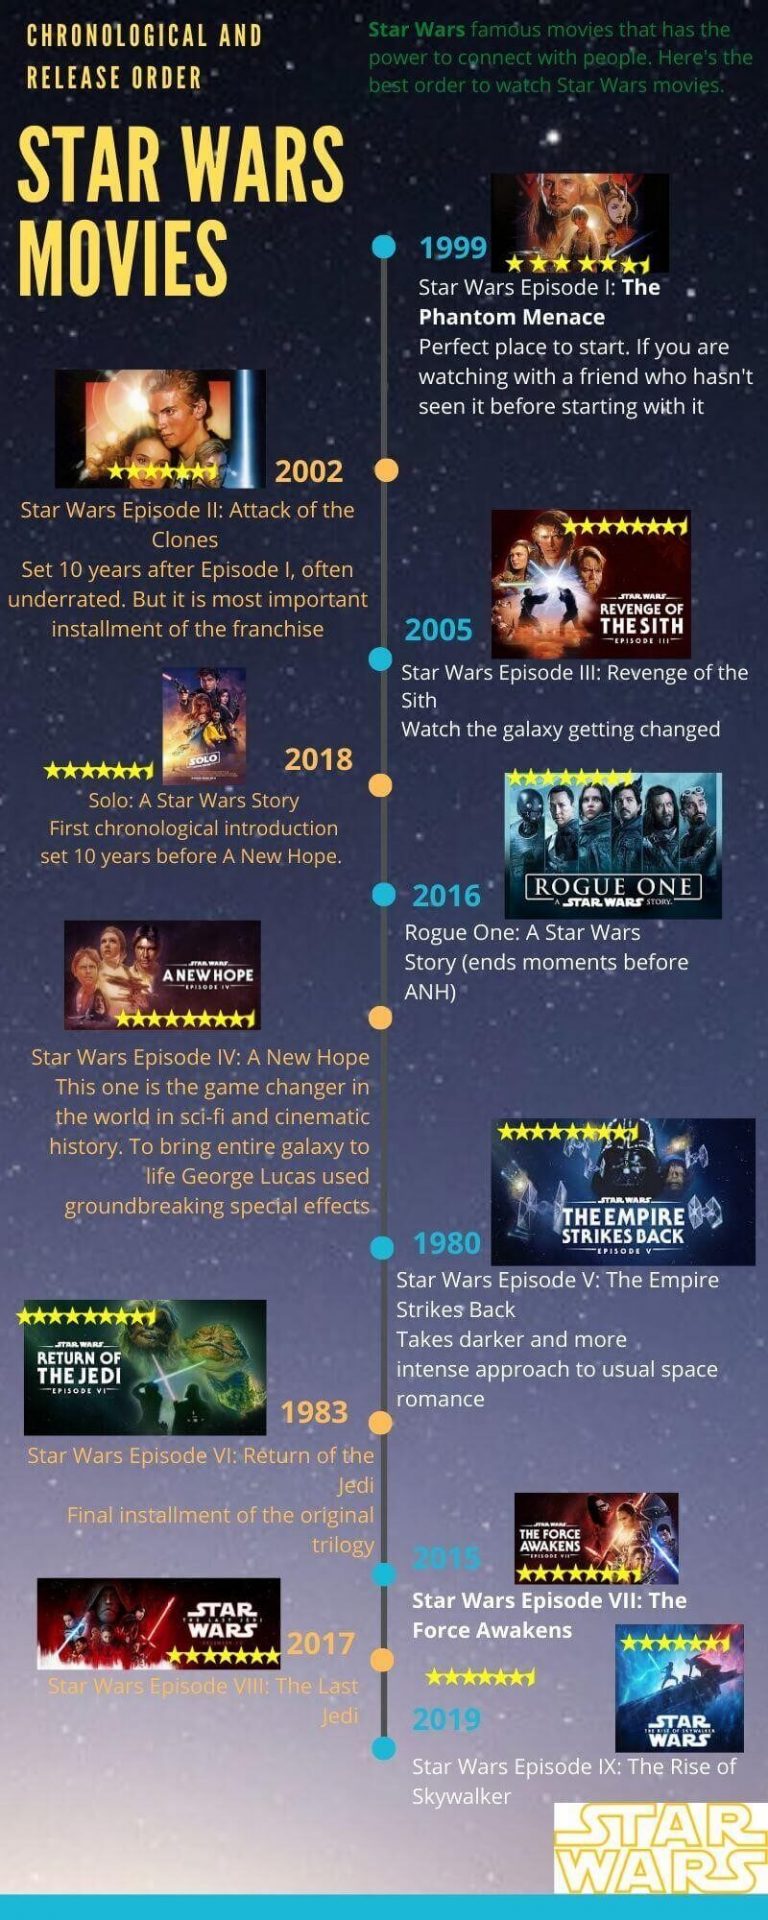 How To Watch Star Wars Movies In Order?